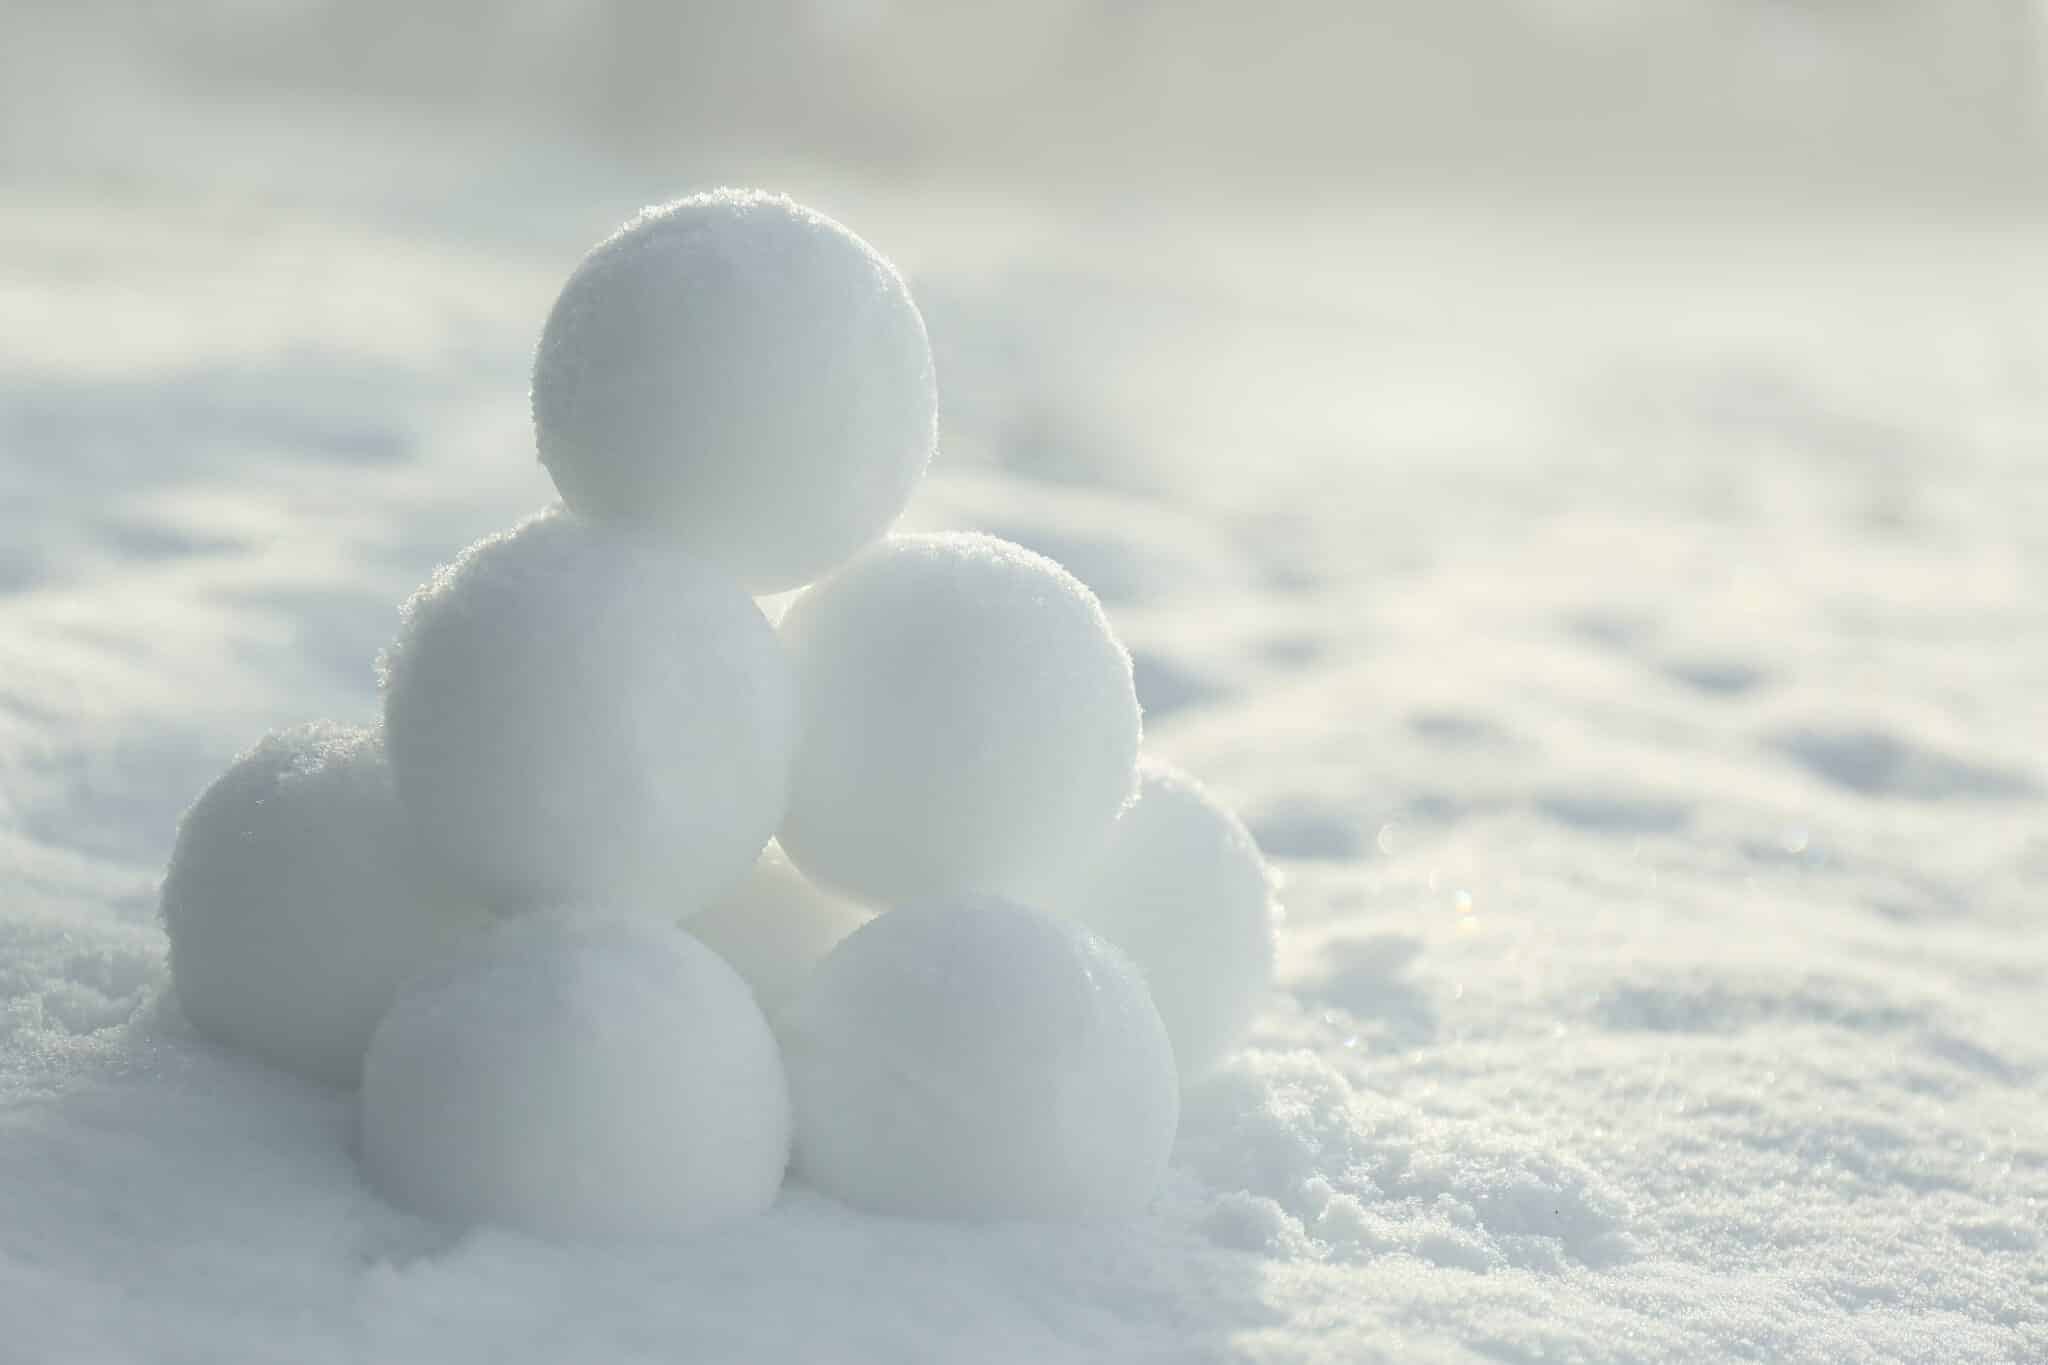 A pile of white snowballs on the ground, ready to be thrown in a lively snowball fight.